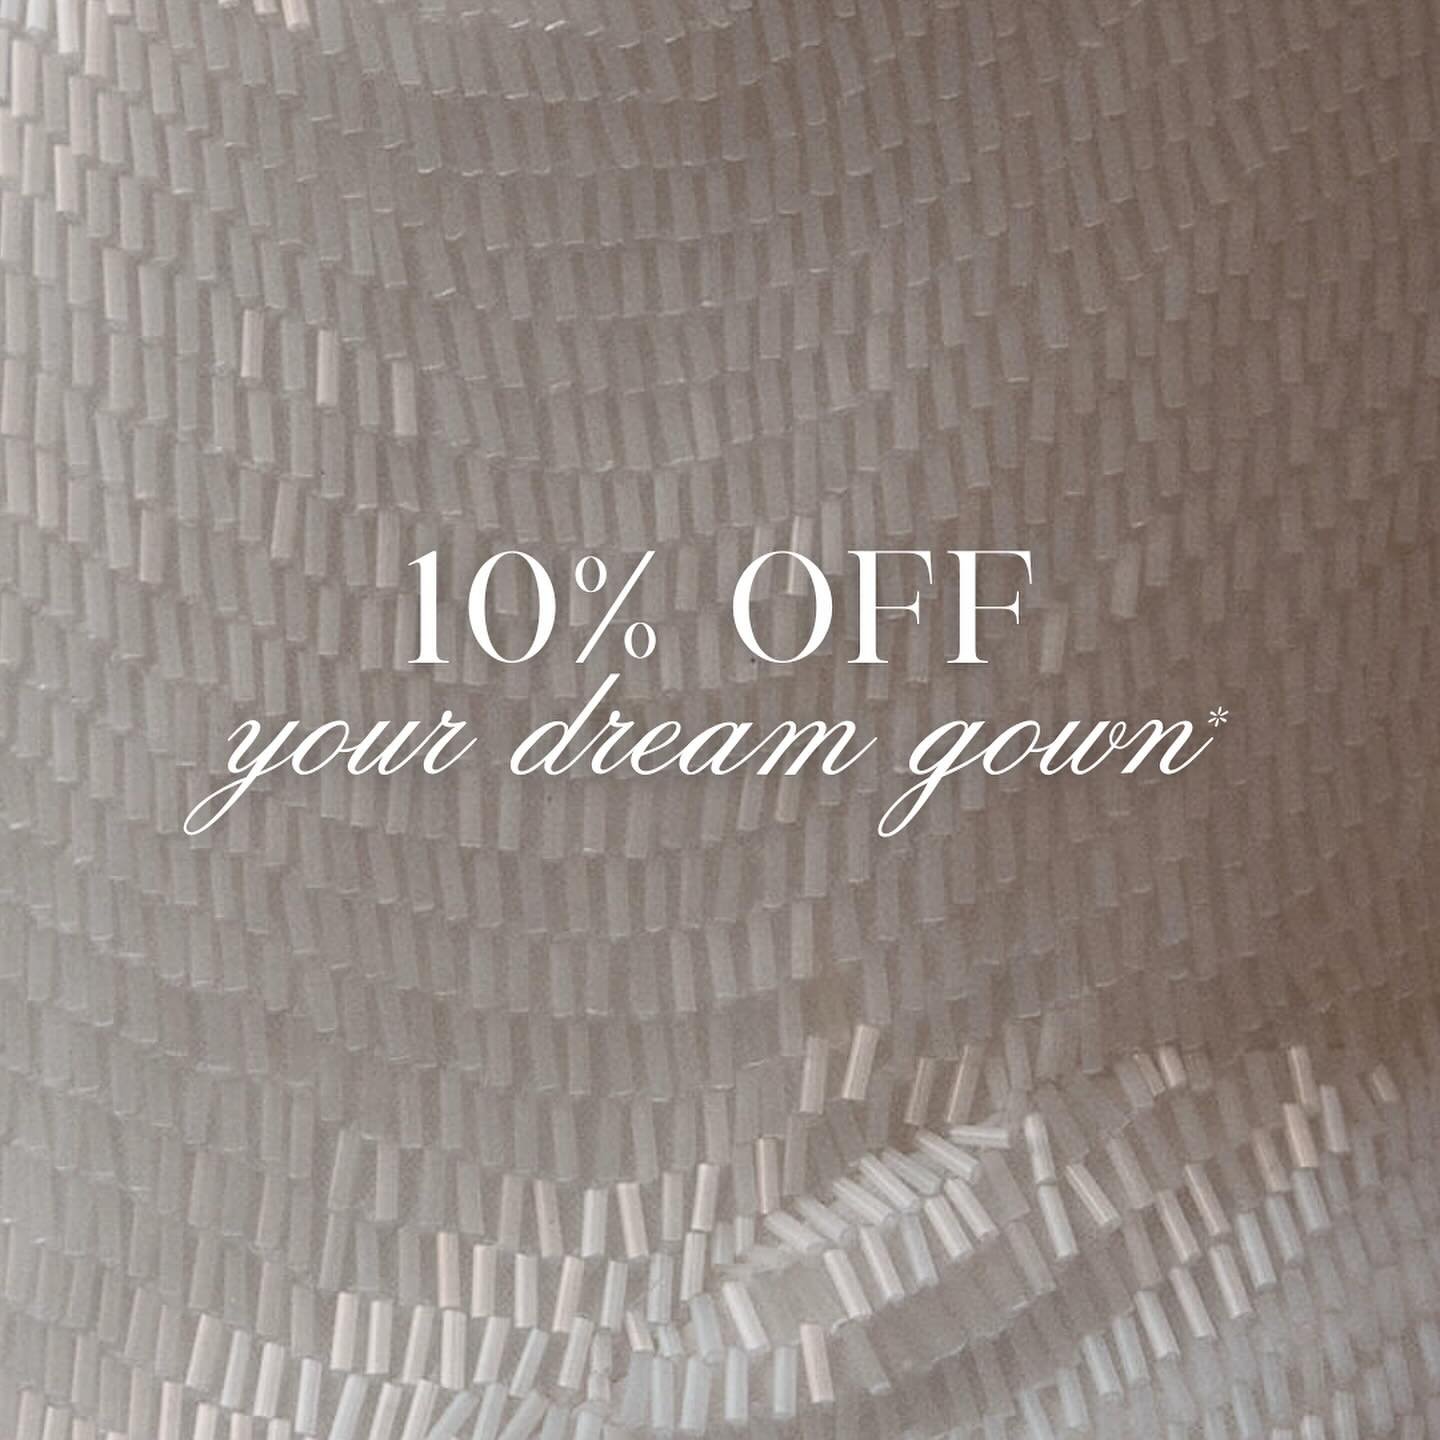 TRUNK SHOW PROMO 🕊️ We are offering 10% off your purchase of a Chosen by Kyha gown through our trunk show dates of May 3rd - 12th! This includes all trunk show gowns as well as our in-store permanent collection of Kyha gowns. See highlighted stories